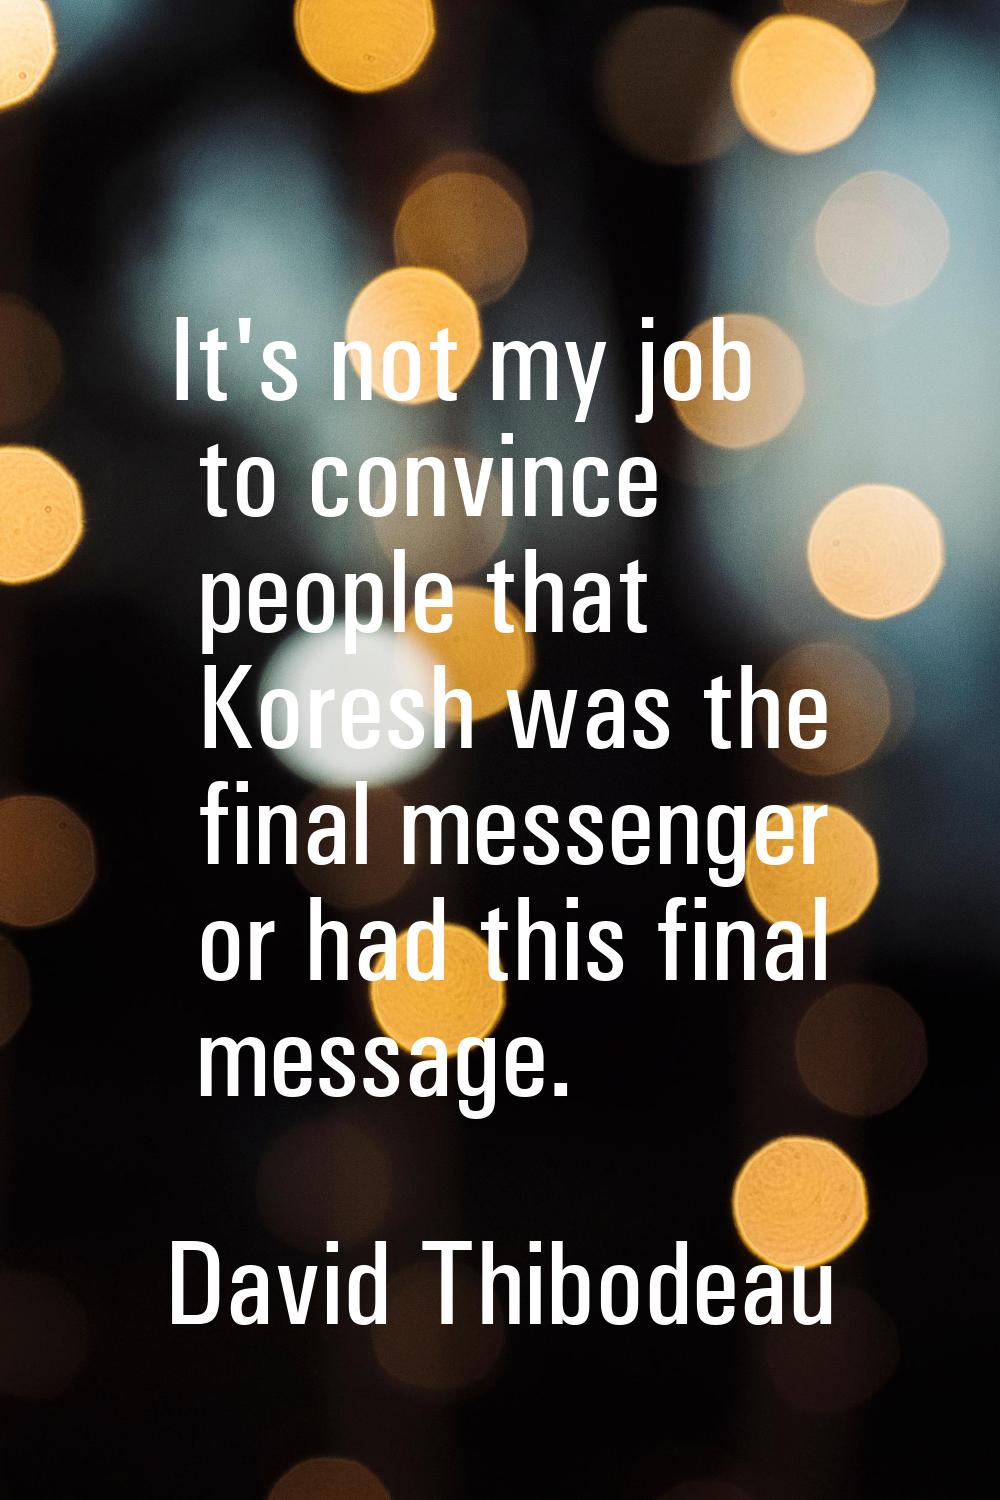 It's not my job to convince people that Koresh was the final messenger or had this final message.